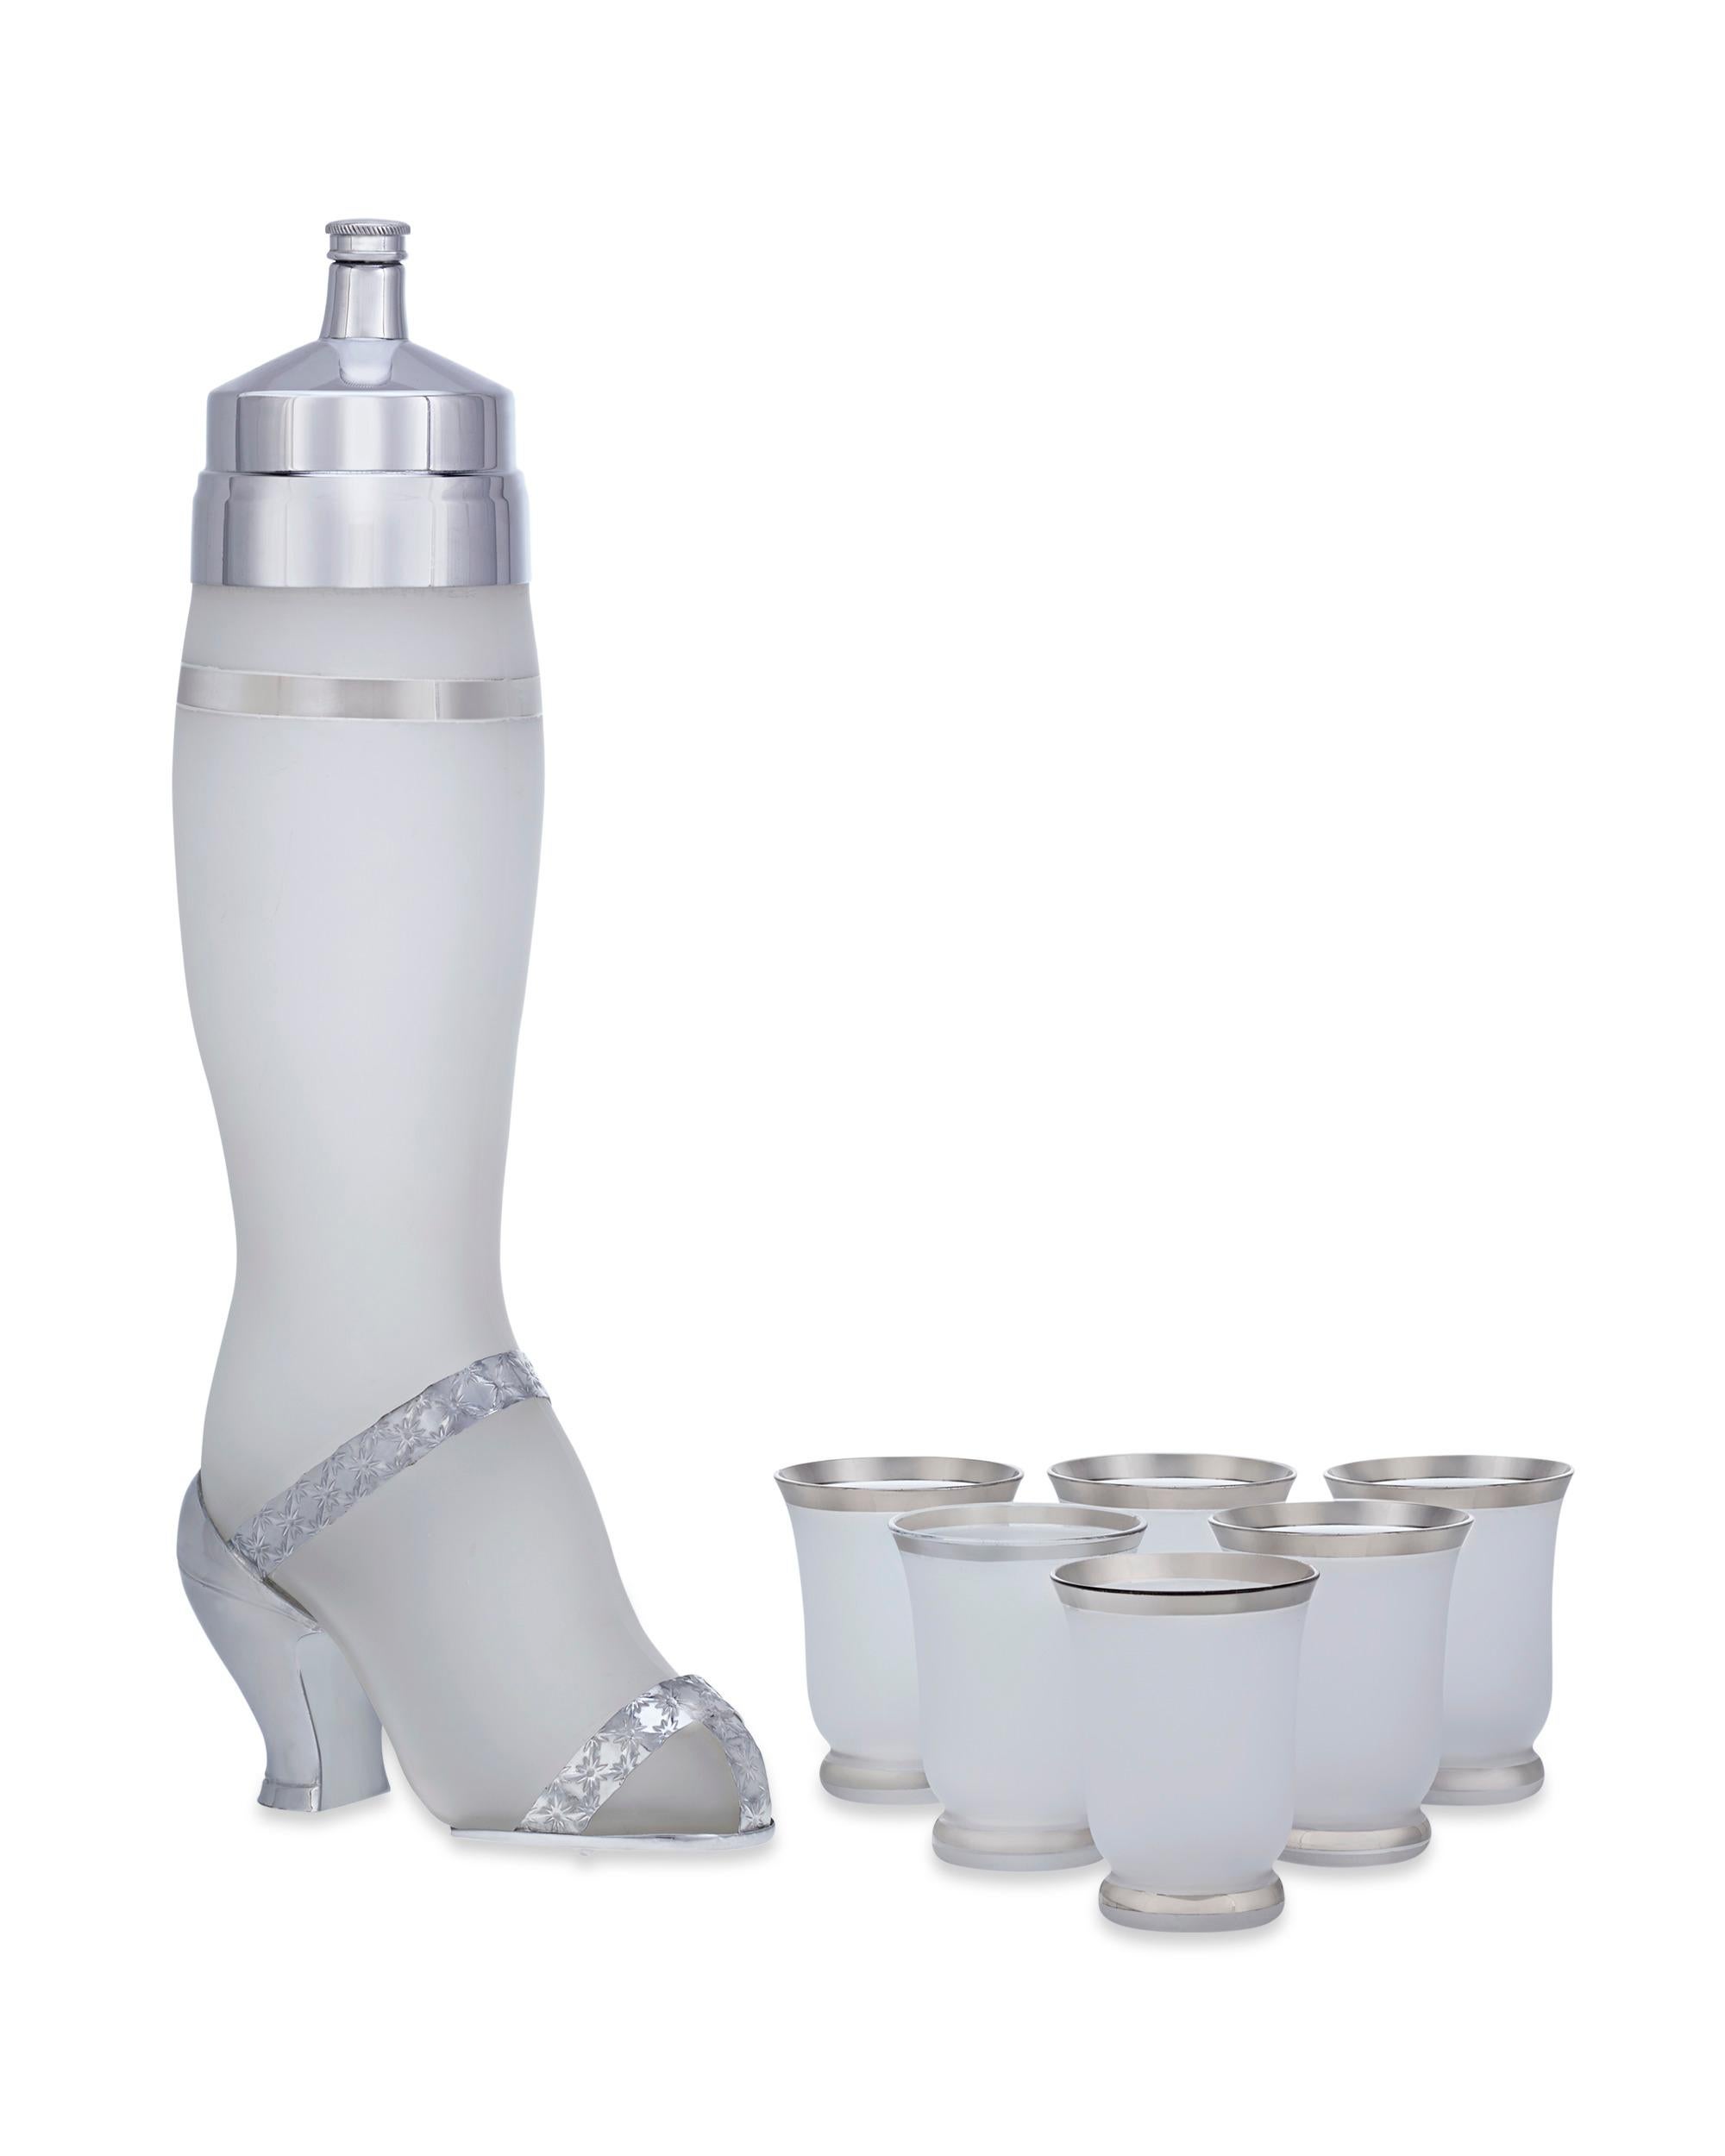 Playful and provocative, this cocktail shaker by West Virginia Specialty Glass Co. takes the form of a lady's leg. The leg is crafted of frosted glass and is accessorized with a silverplate dancing shoe. A silverplate lid tops the shaker, and it